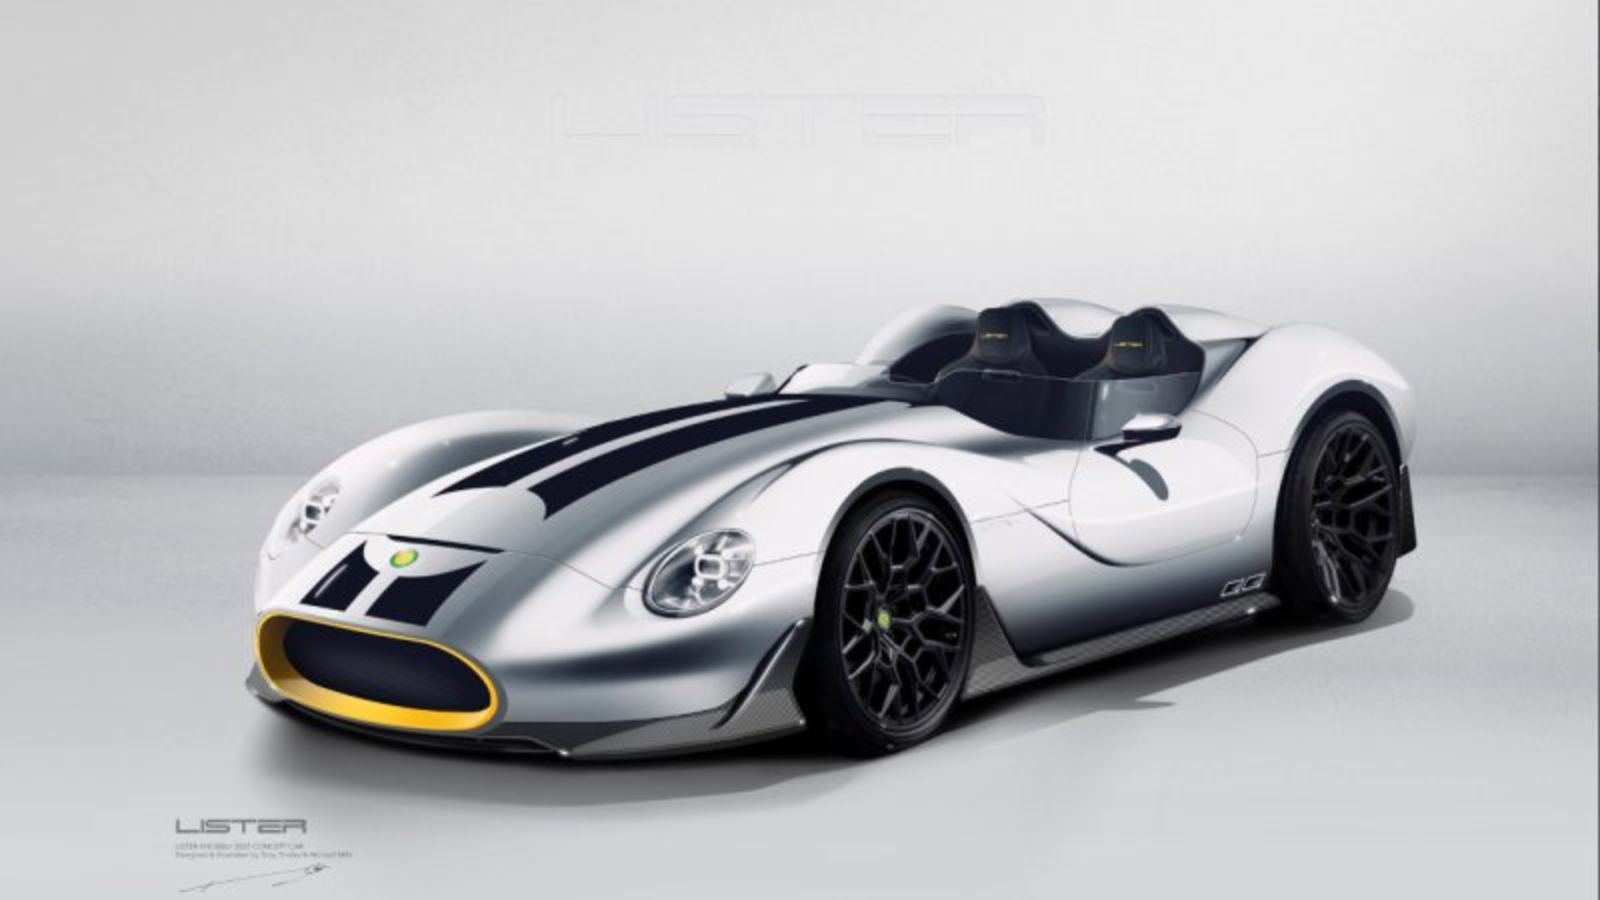 Illustration for article titled So much want: Lister Knobbly